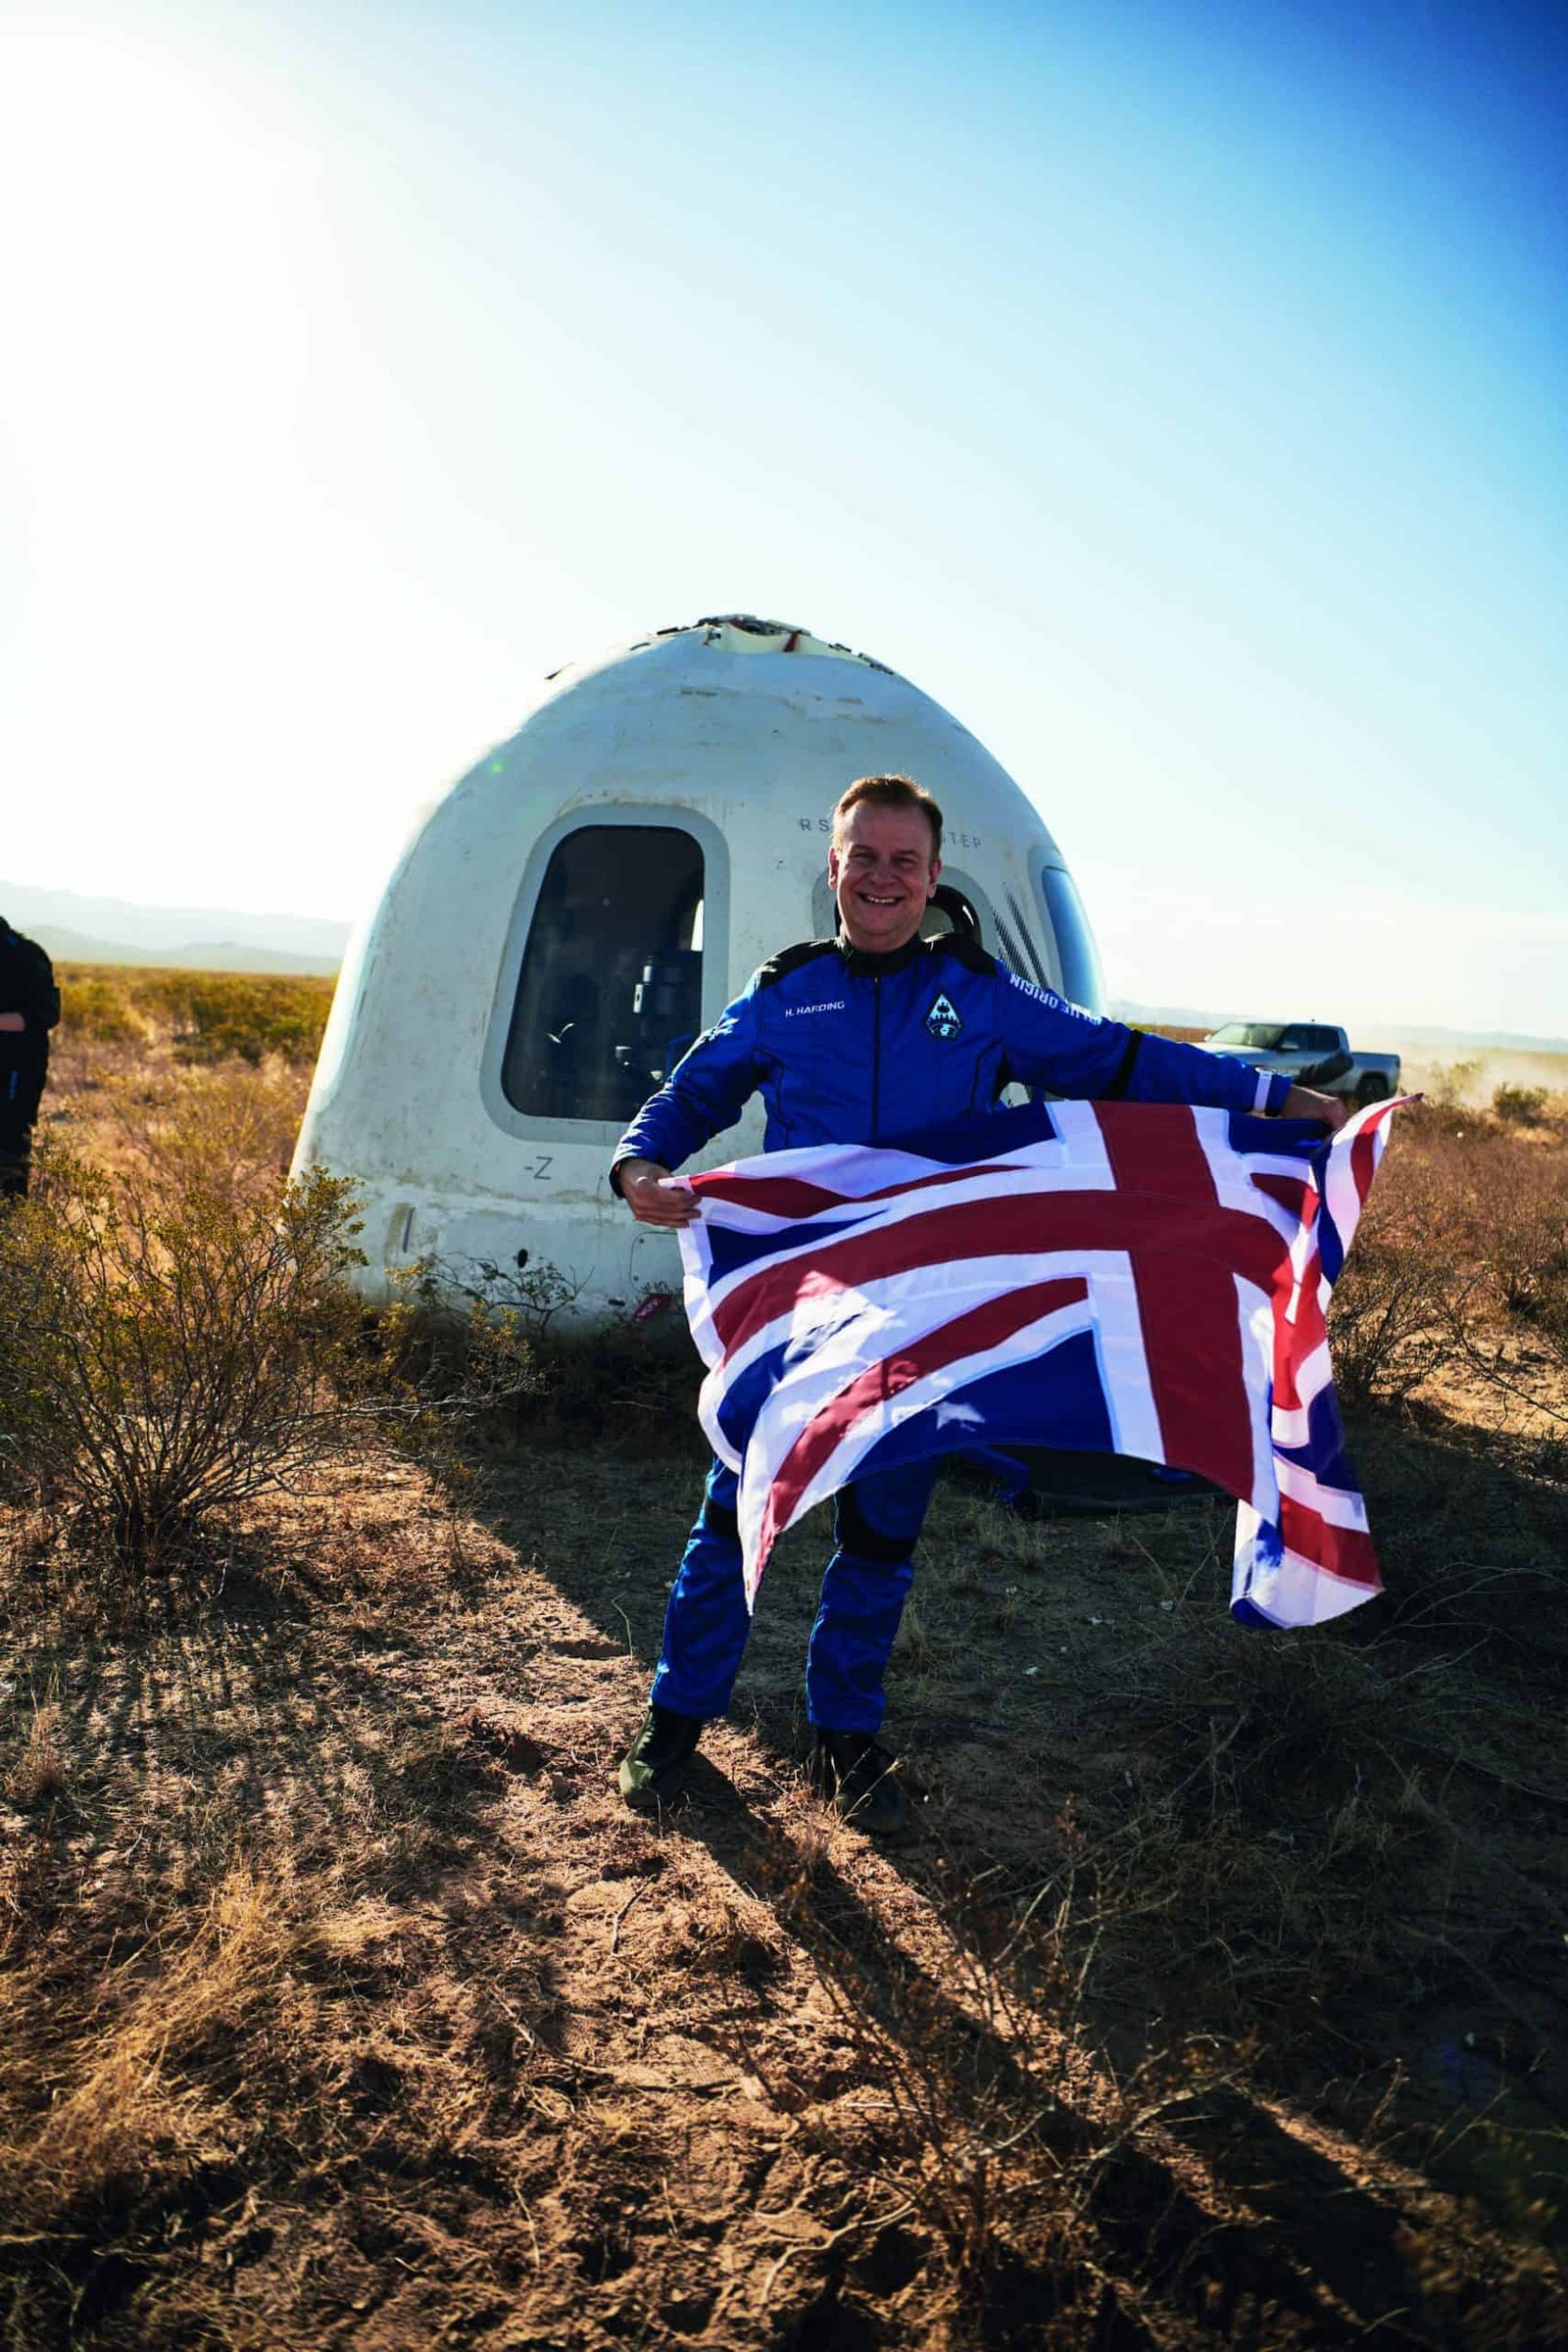 A pioneer holding a British flag in front of a spacecraft.